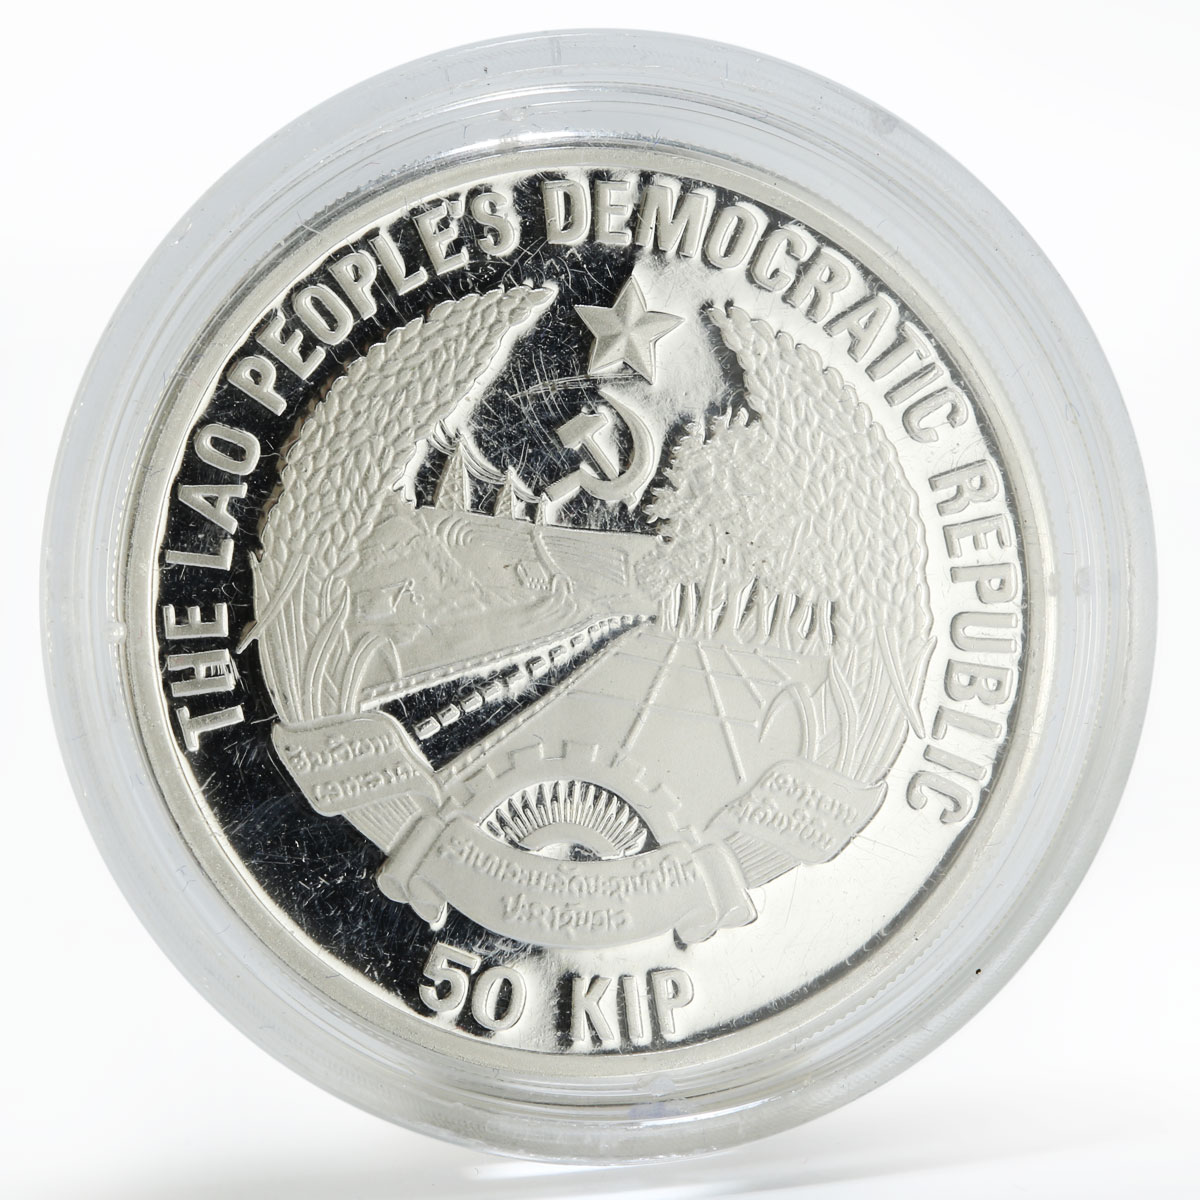 Laos 50 kip Endangered Wildlife Tigers proof silver coin 1991